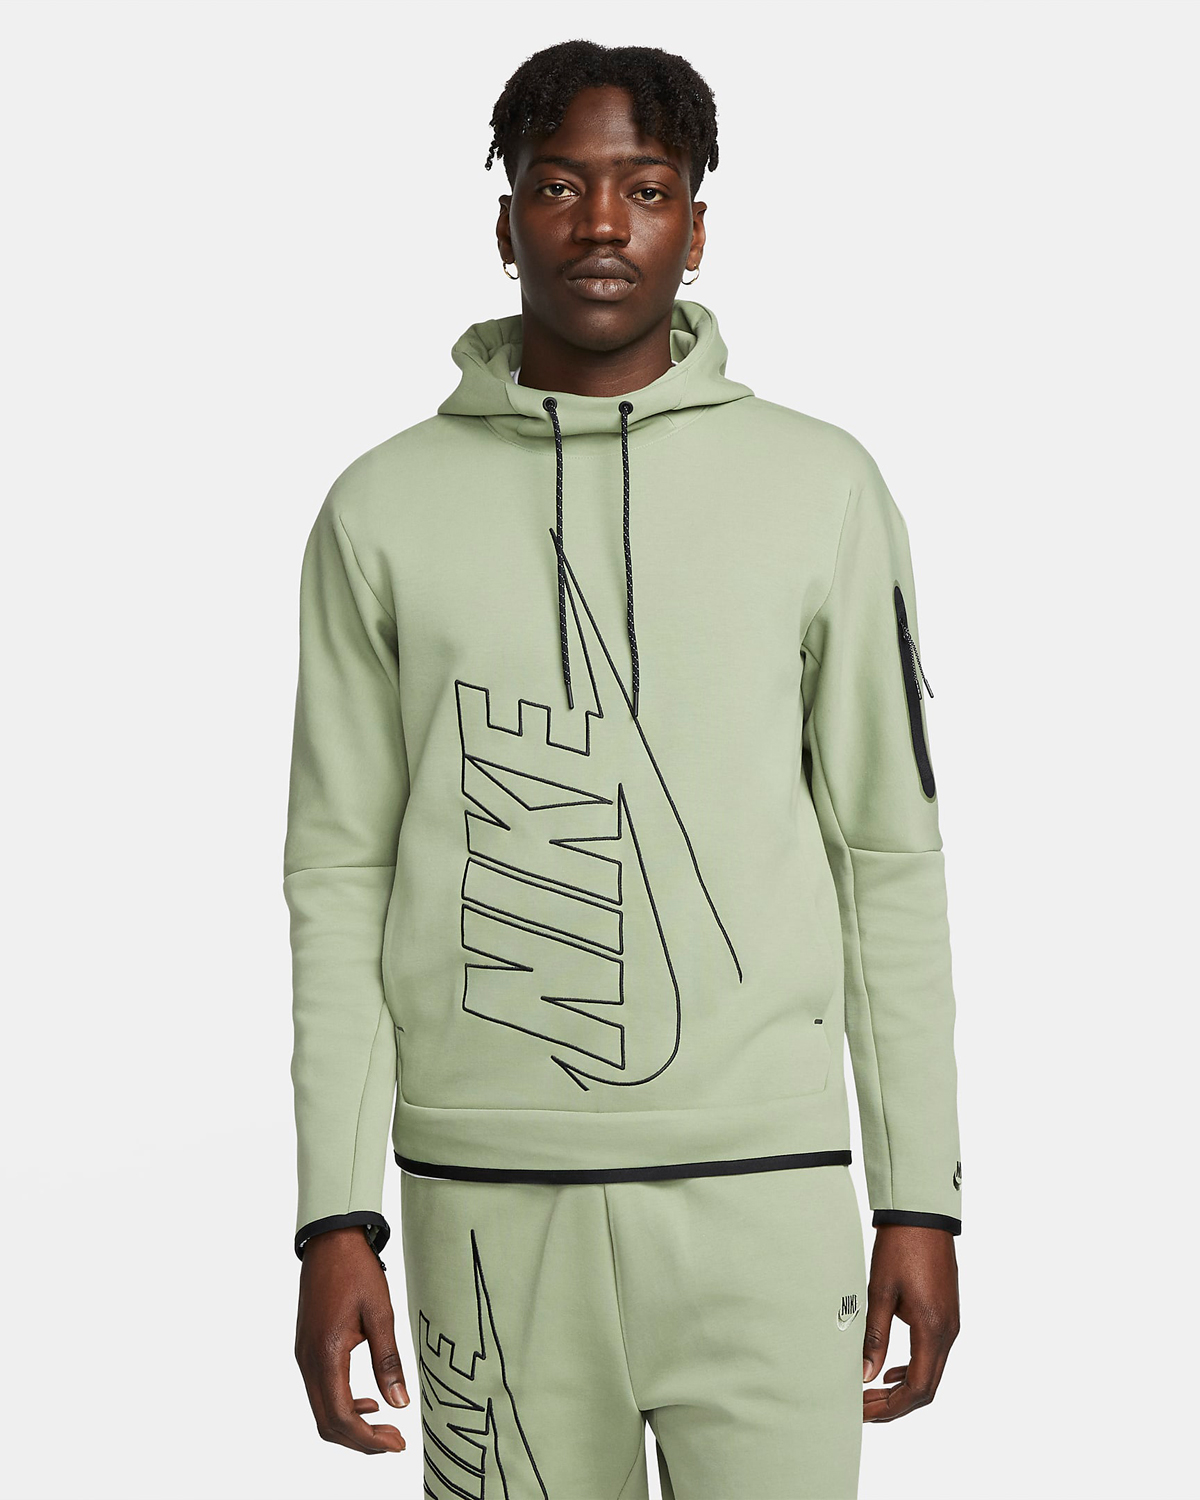 Nike Sportswear Oil Green Shirts Clothing Sneaker Outfits